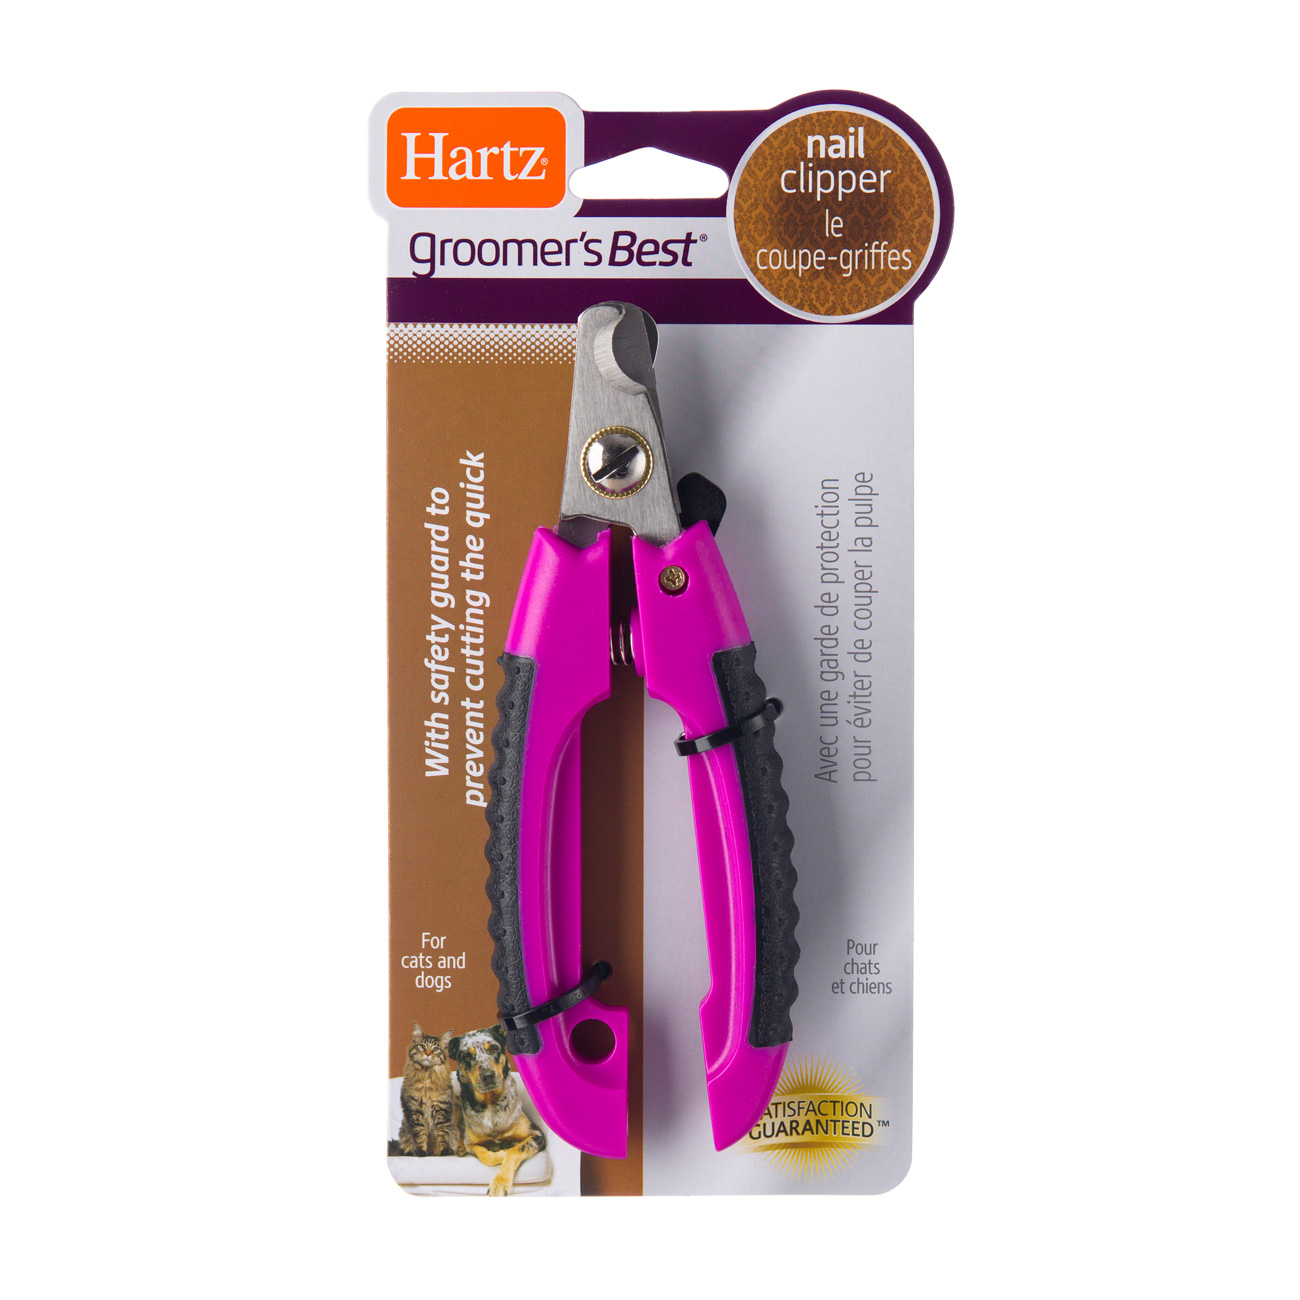 Black and purple nail clipper for dogs and cats, Hartz SKU 3270085771